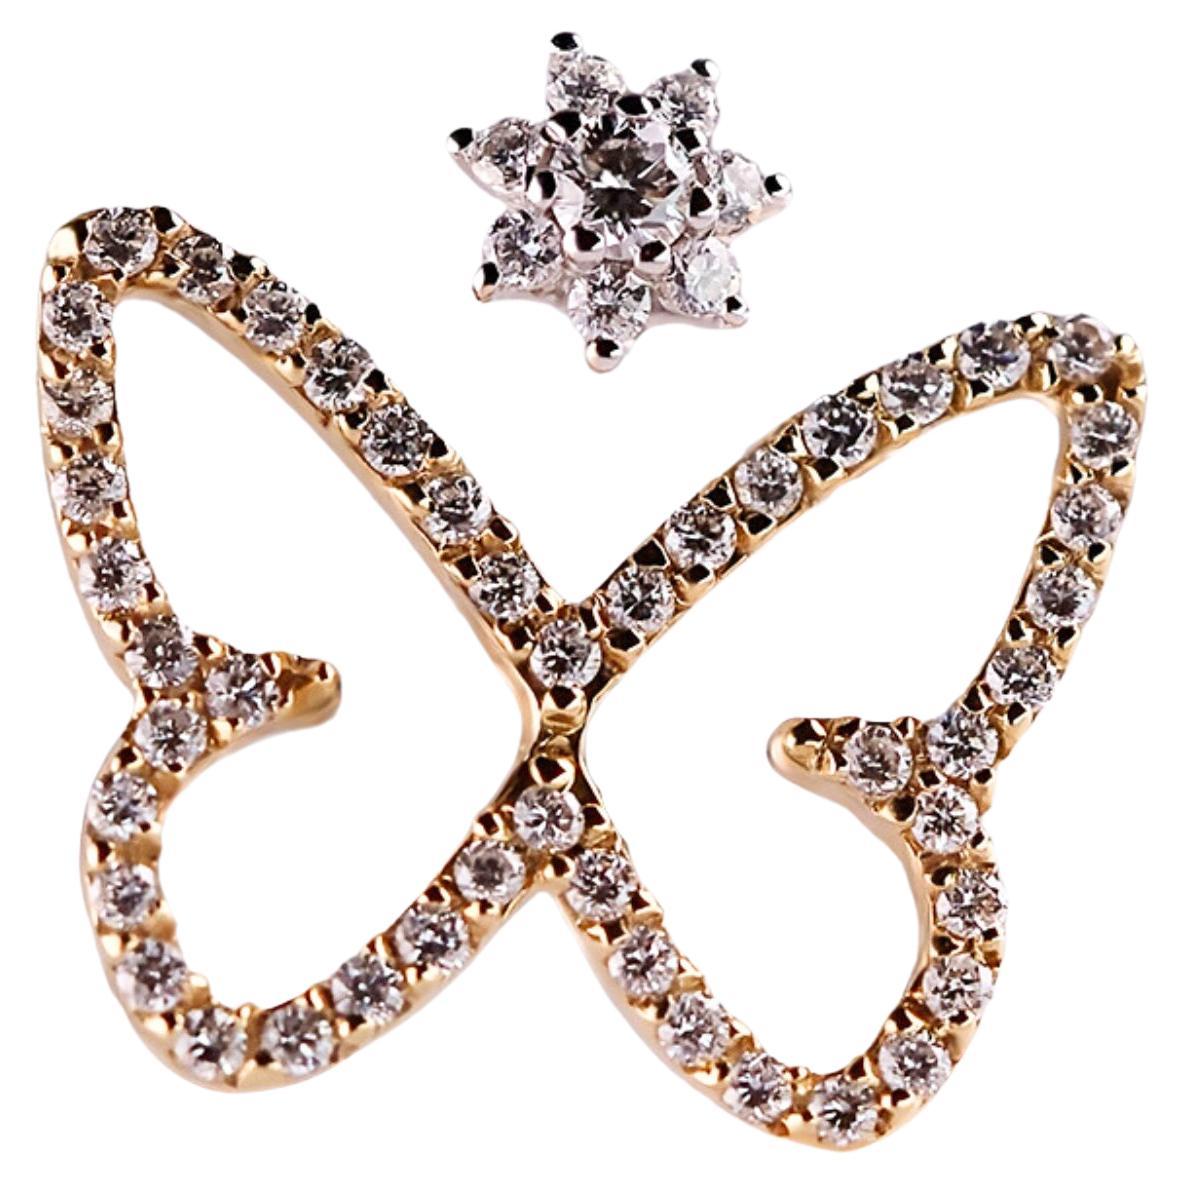 Charming Butterfly & Floral Diamond Ring in Bi-Colored 18kt Gold For Sale